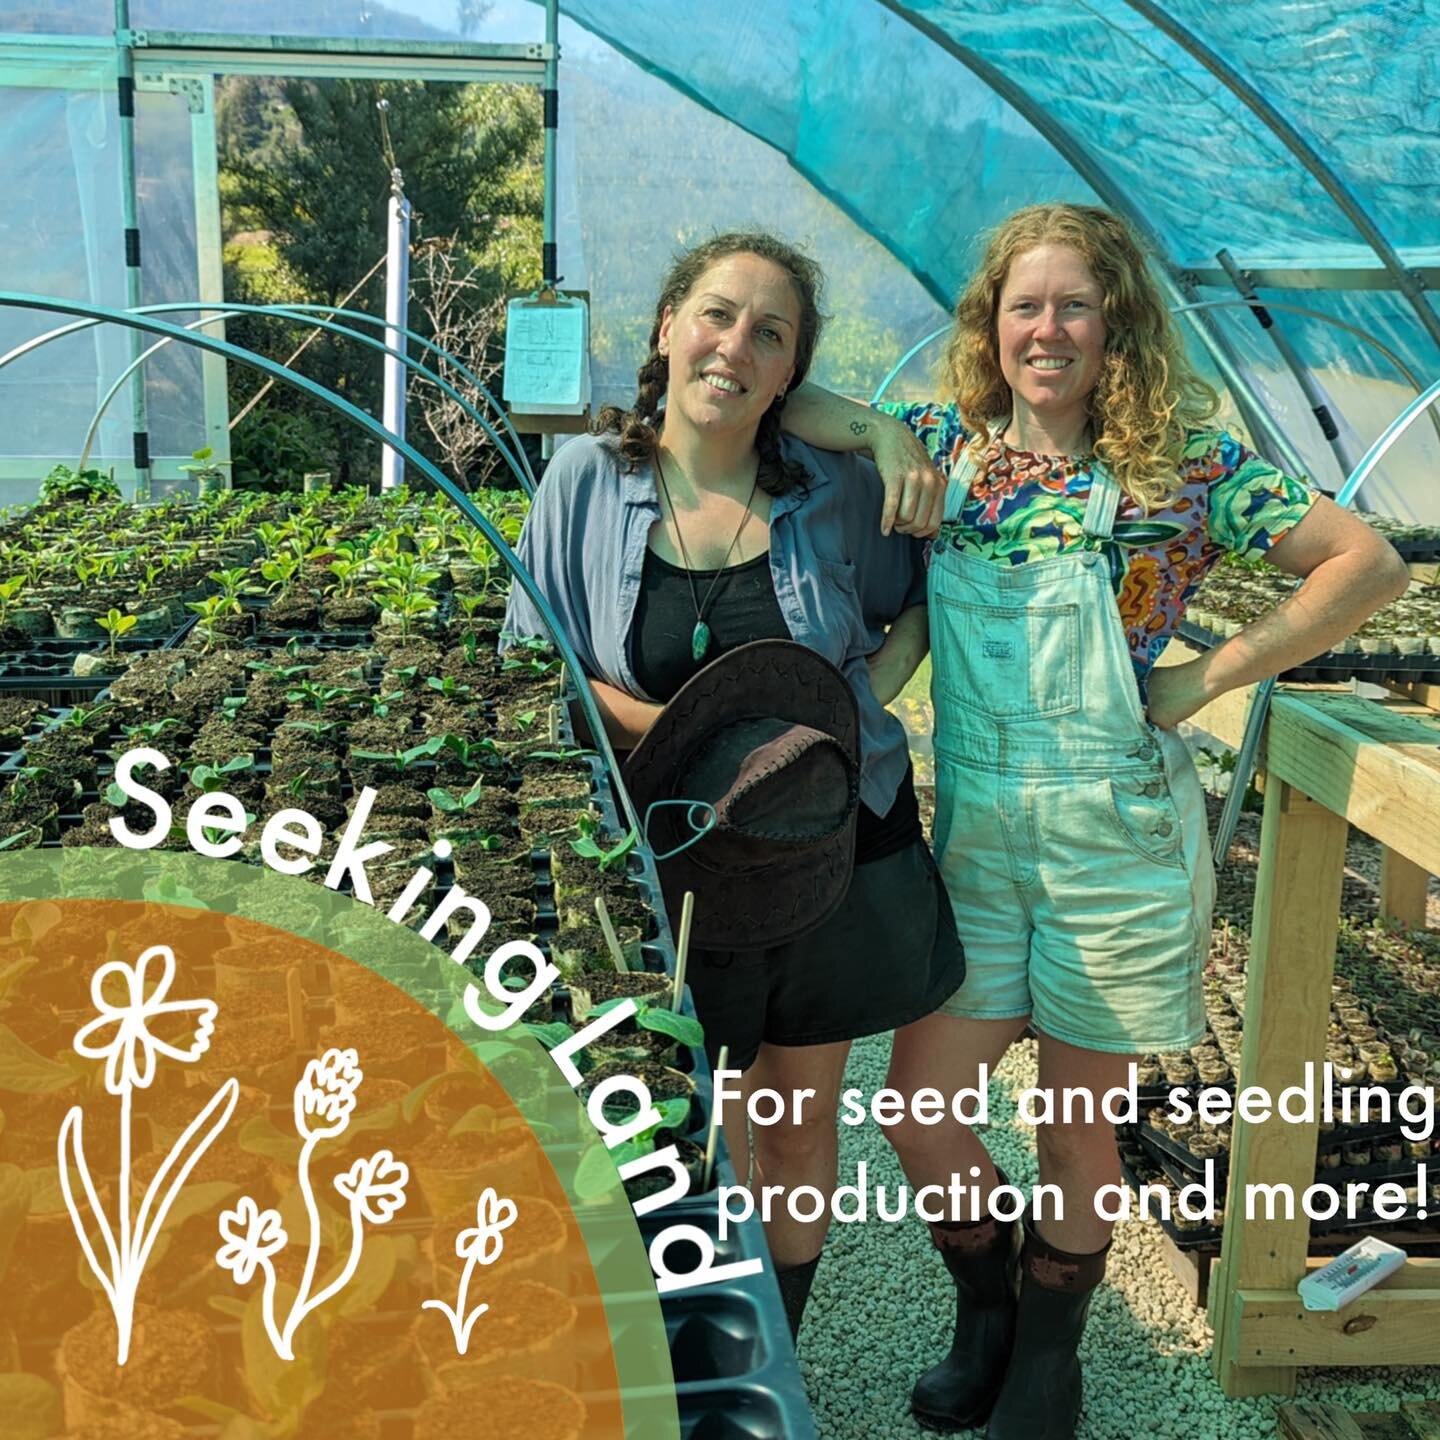 SEEKING LAND - North Island and top of South Island. @theeasternfield and a new social enterprise, Te Kohanga Kai, are looking for a new home. They are seeking 1.5 to 2 acres to continue their seed saving, plant nursery, and garden consultancy, and d